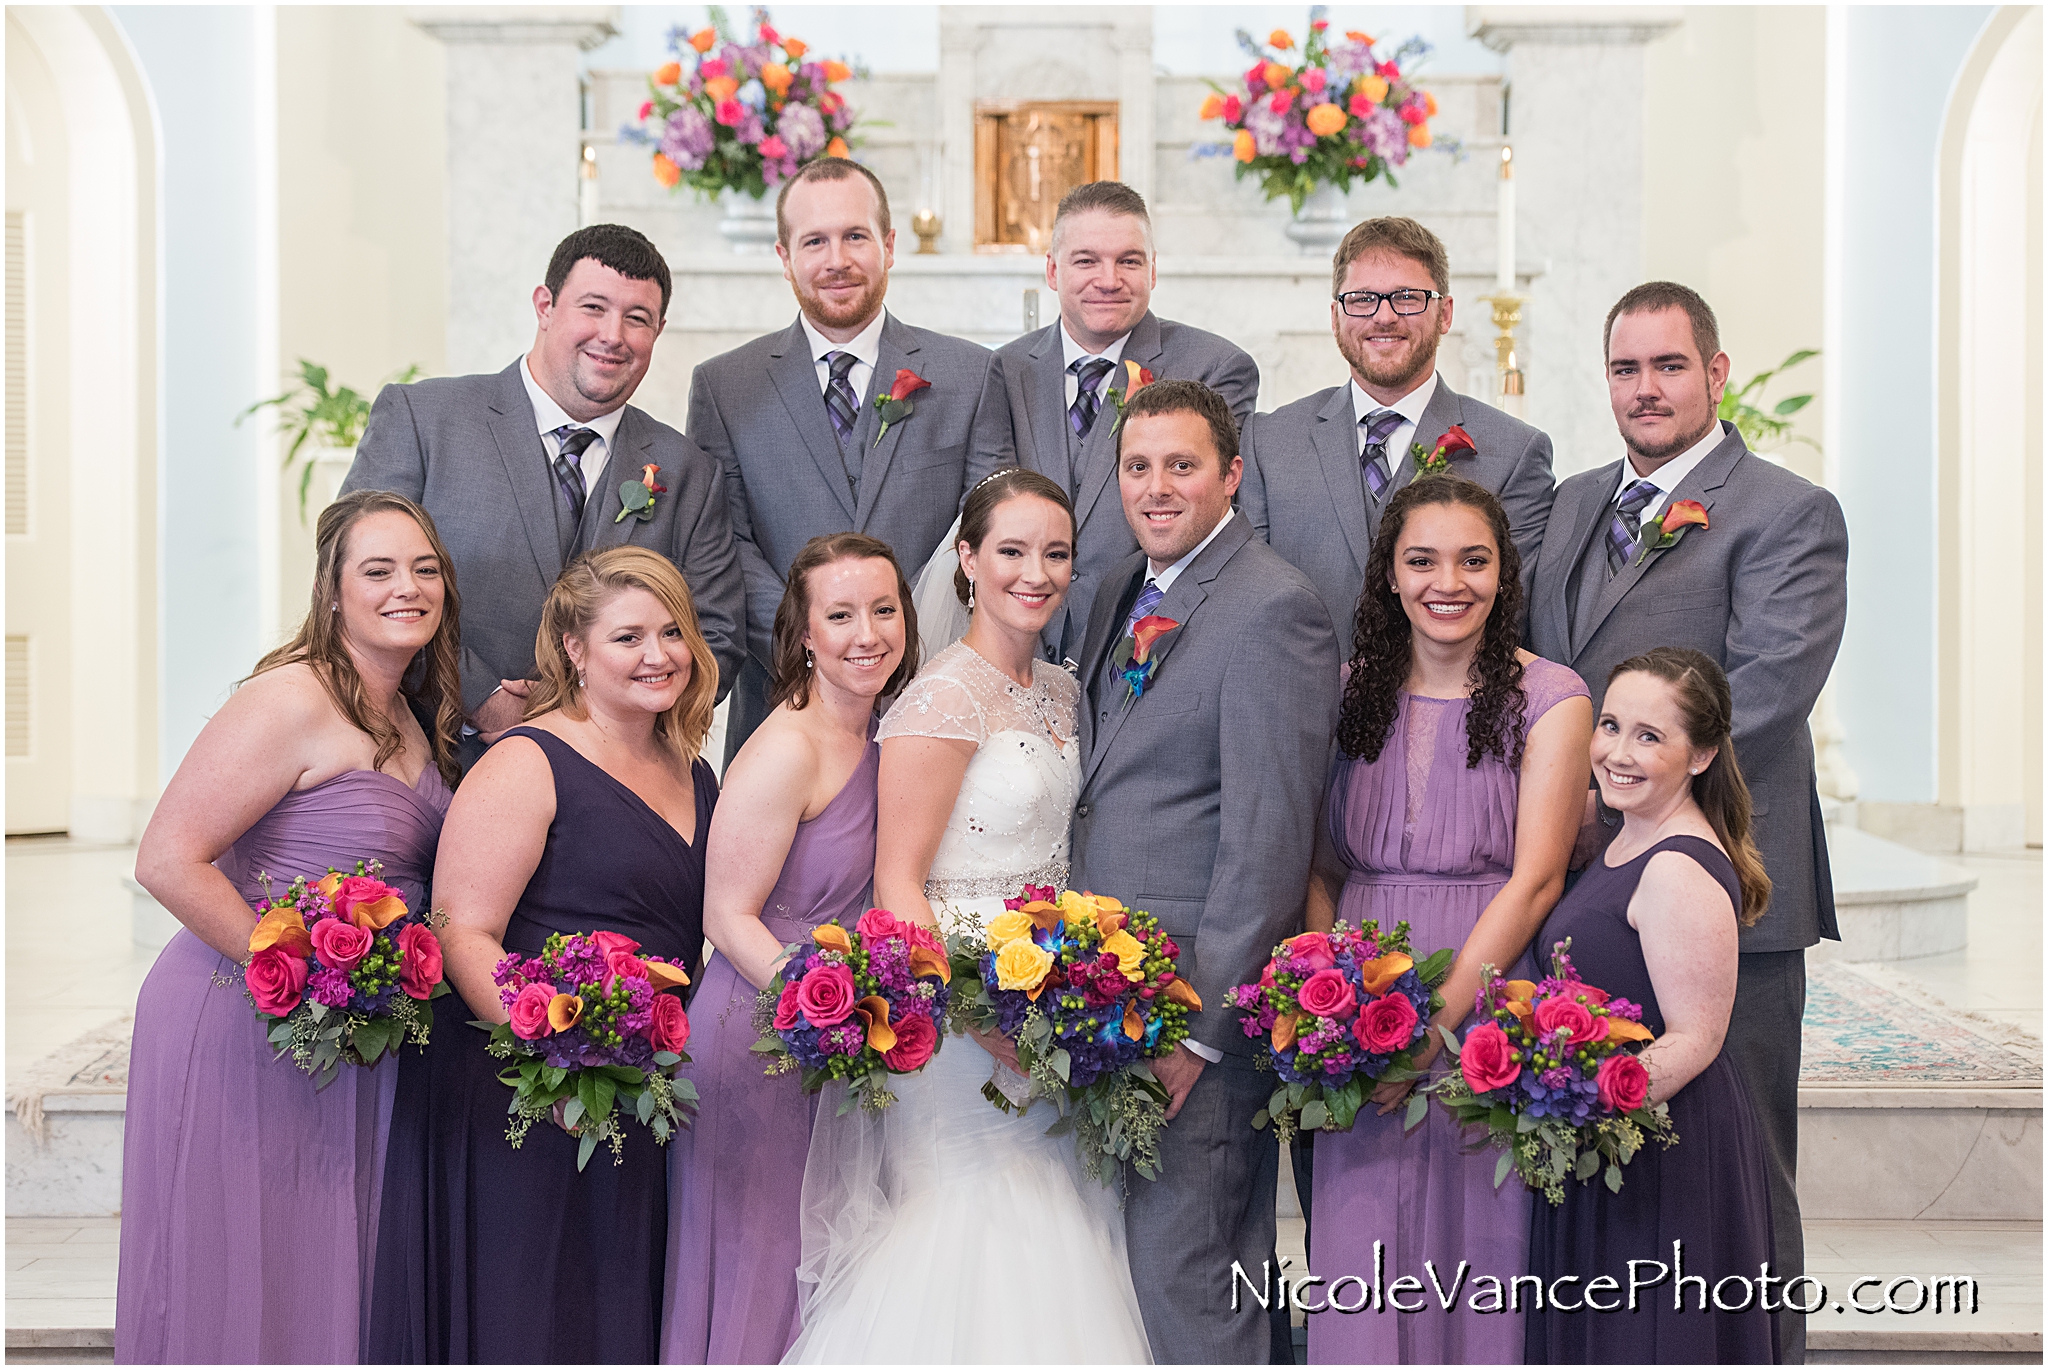 Bridal party photos in St Peter's Church in Richmond Virginia.